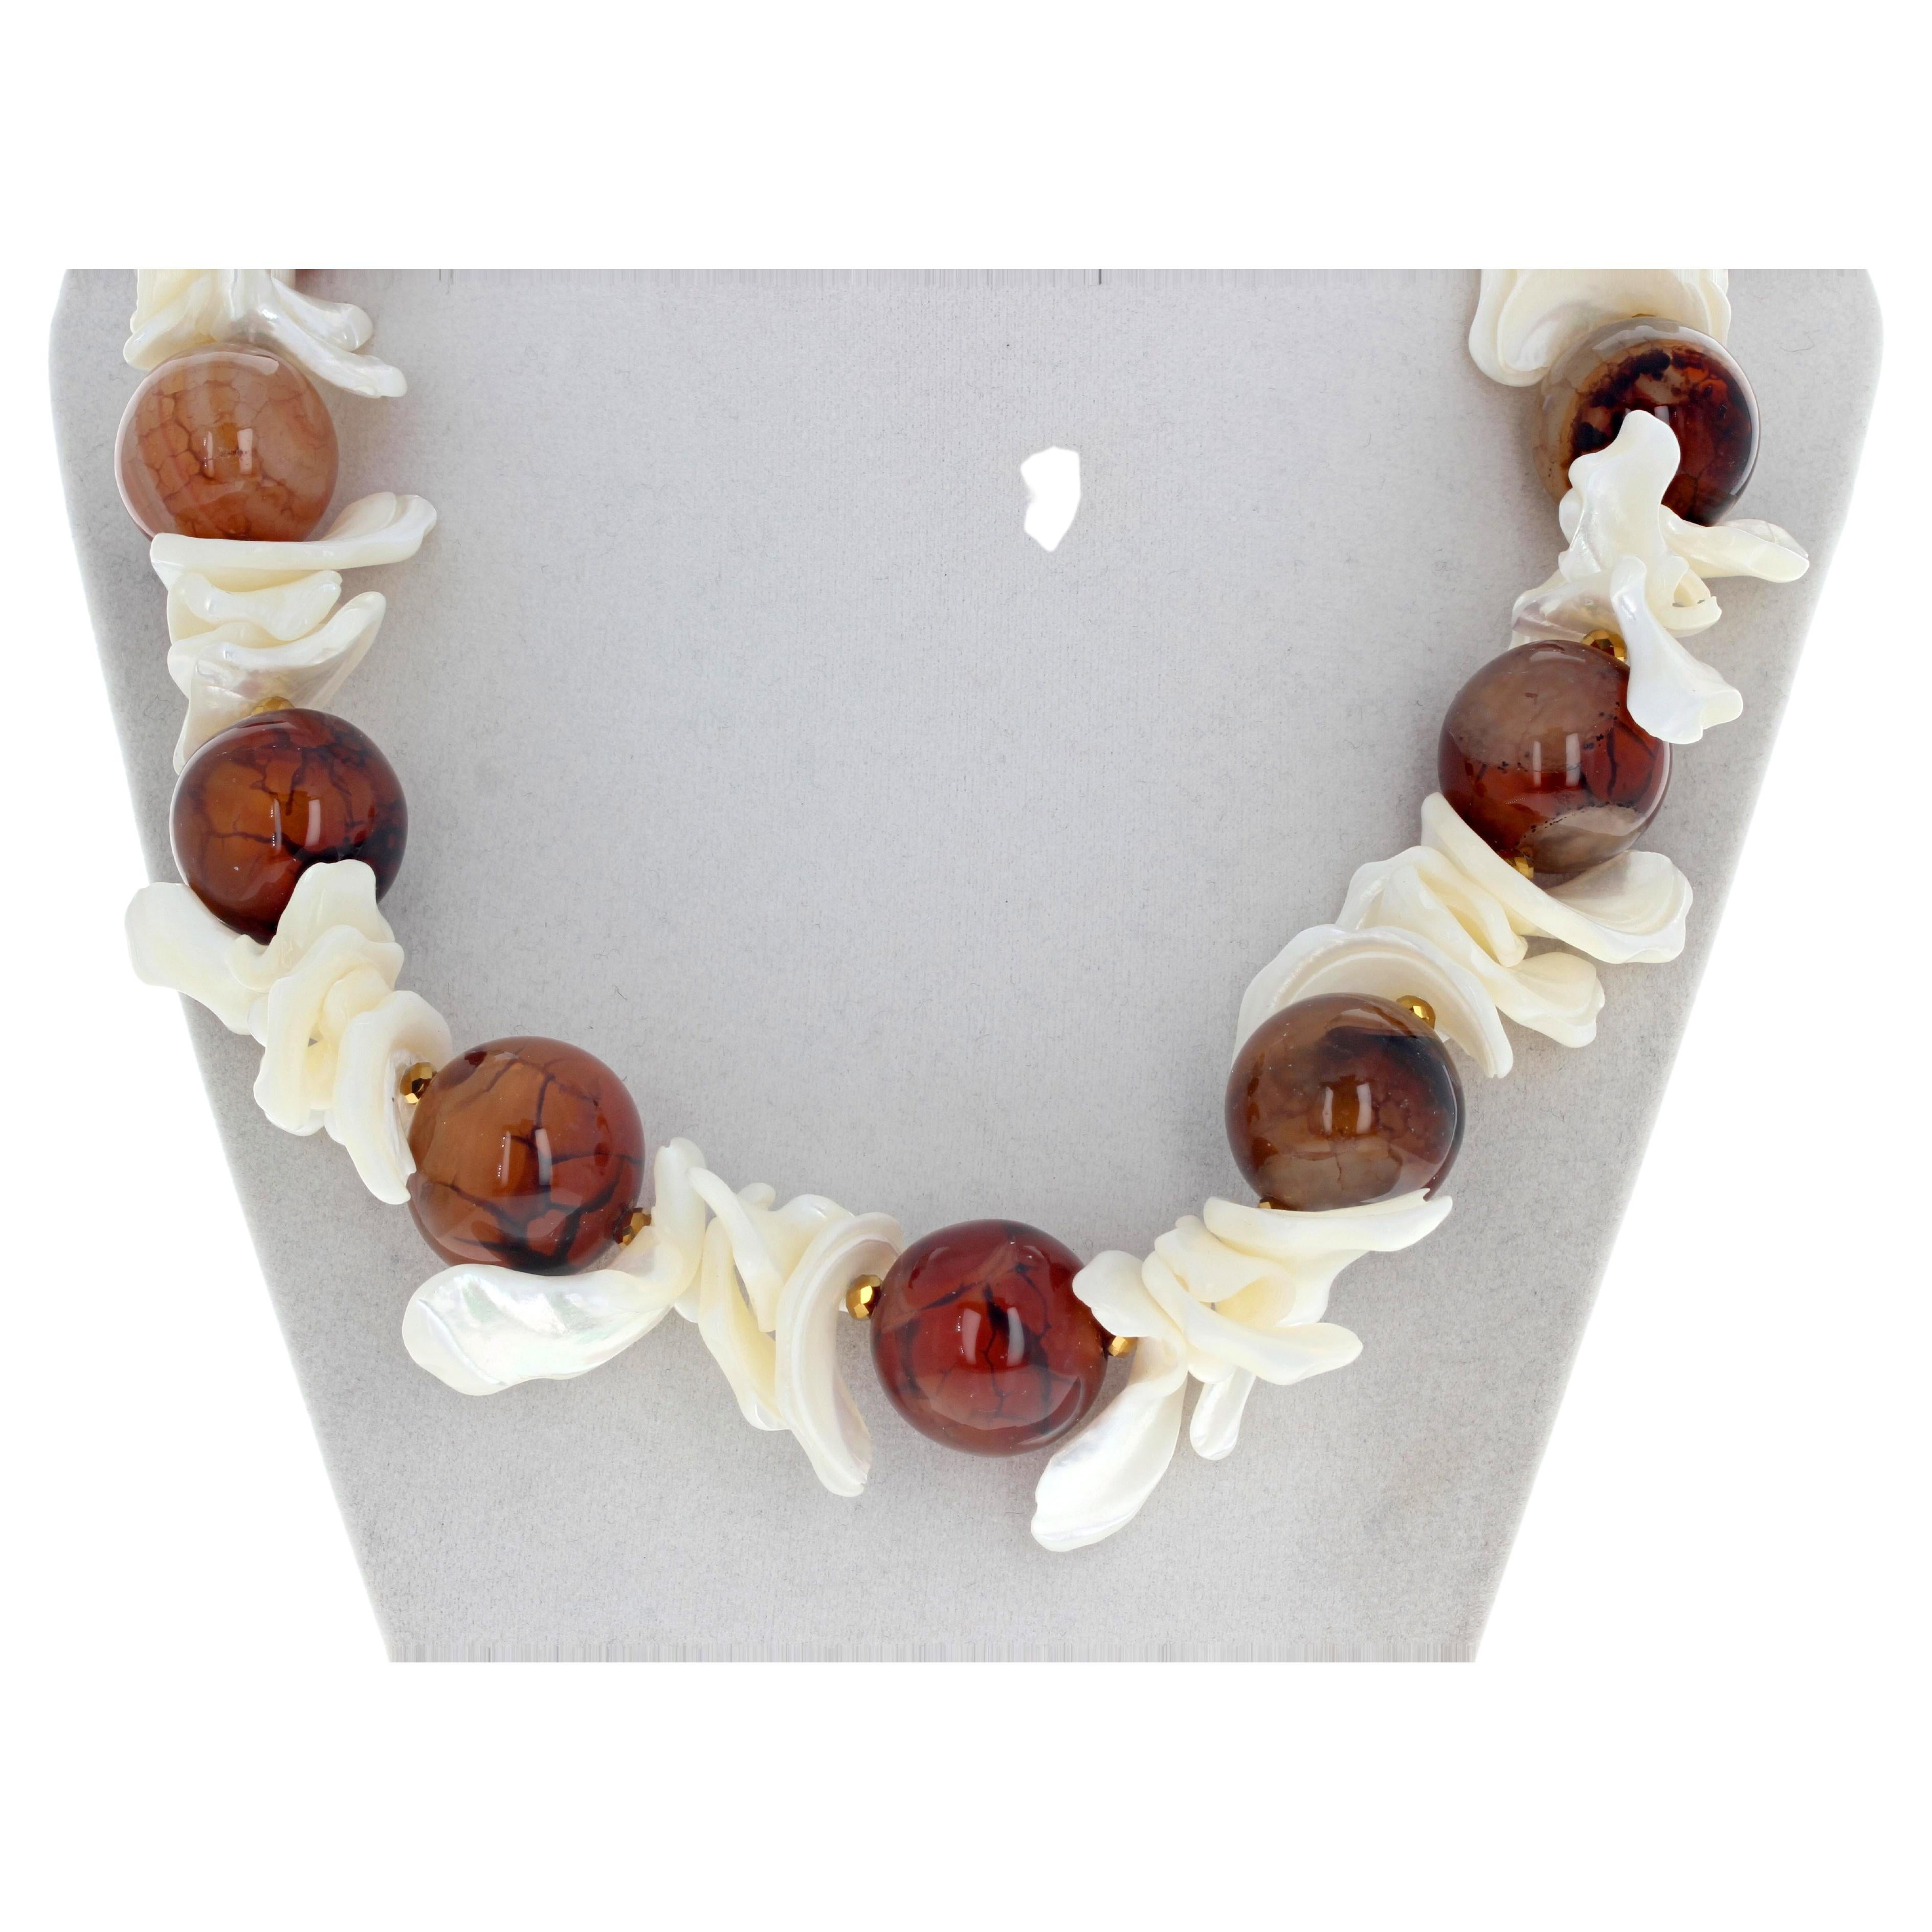 These beautifully highly polished natural translucent 21mm Agates glow different colors intensely in this 20 inch long necklace.  The flippy floppy beautiful white natural Peal Shells have no sharp edges and are comfortable and easy to wear.  The